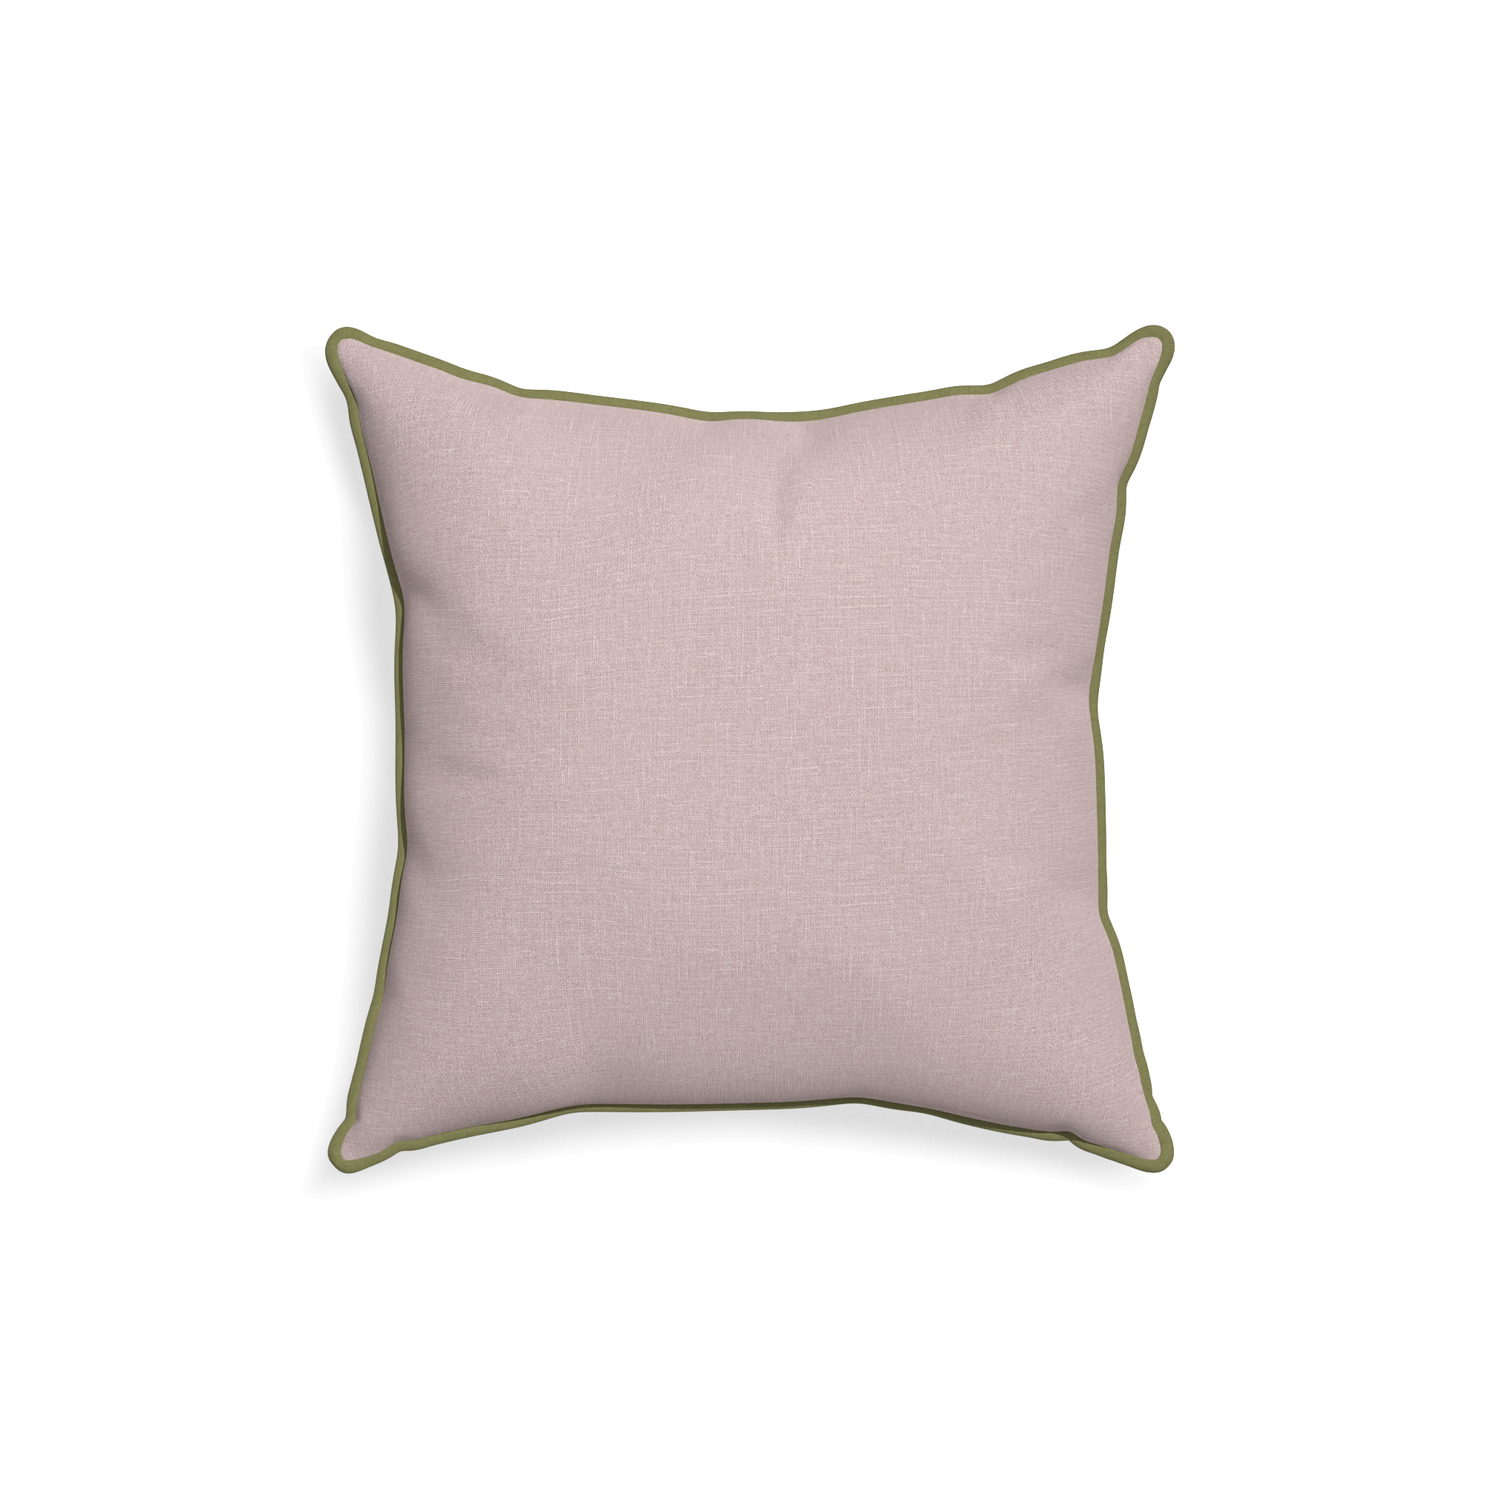 18-square orchid custom mauve pinkpillow with moss piping on white background